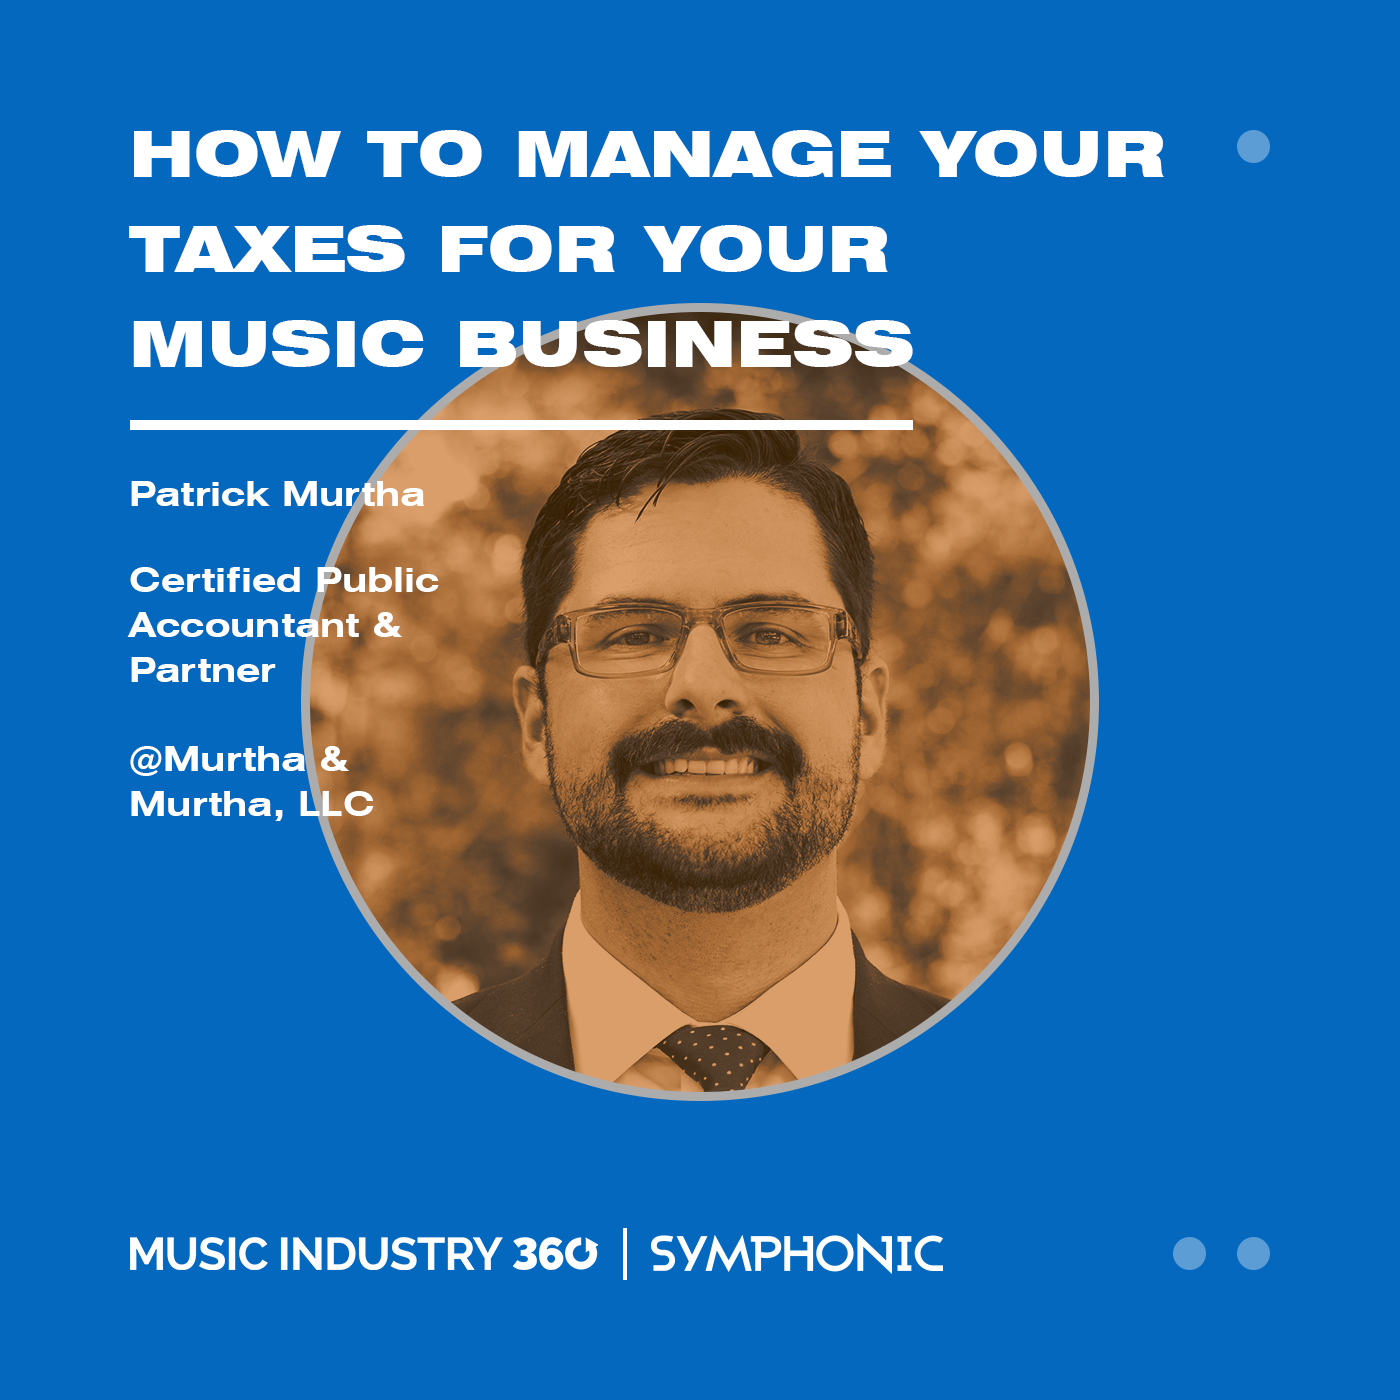 Music Finances: How To Manage Your Taxes for Your Music Business | Music Industry 360 Podcast